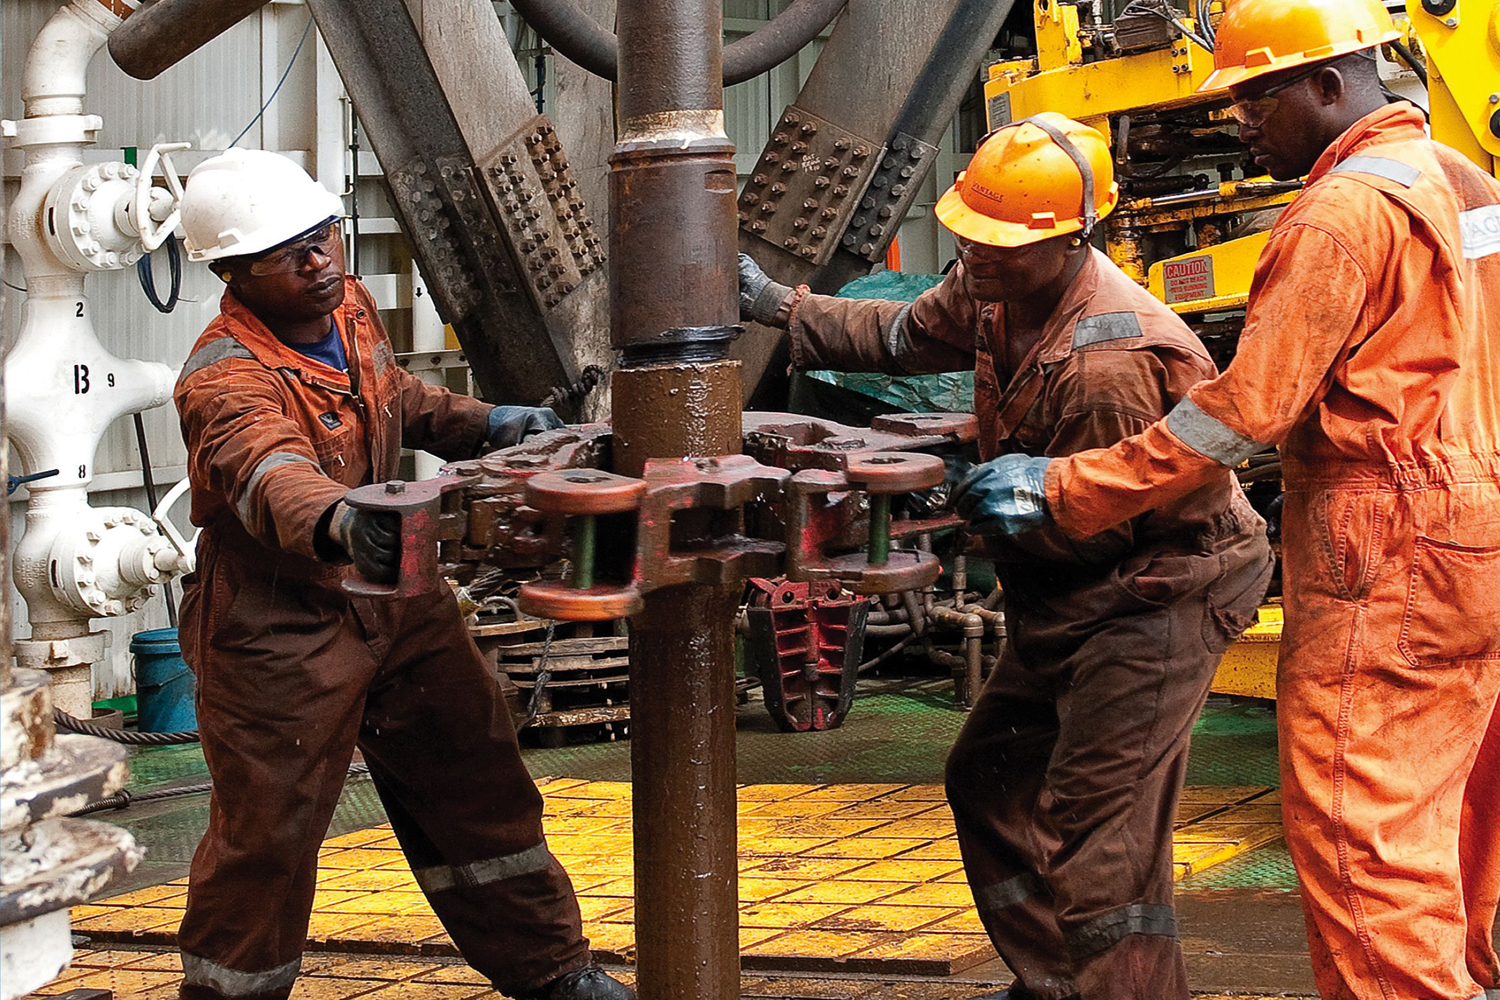 PwC Oil & Gas review "Africa’s oil & gas industry needs to ‘learn to